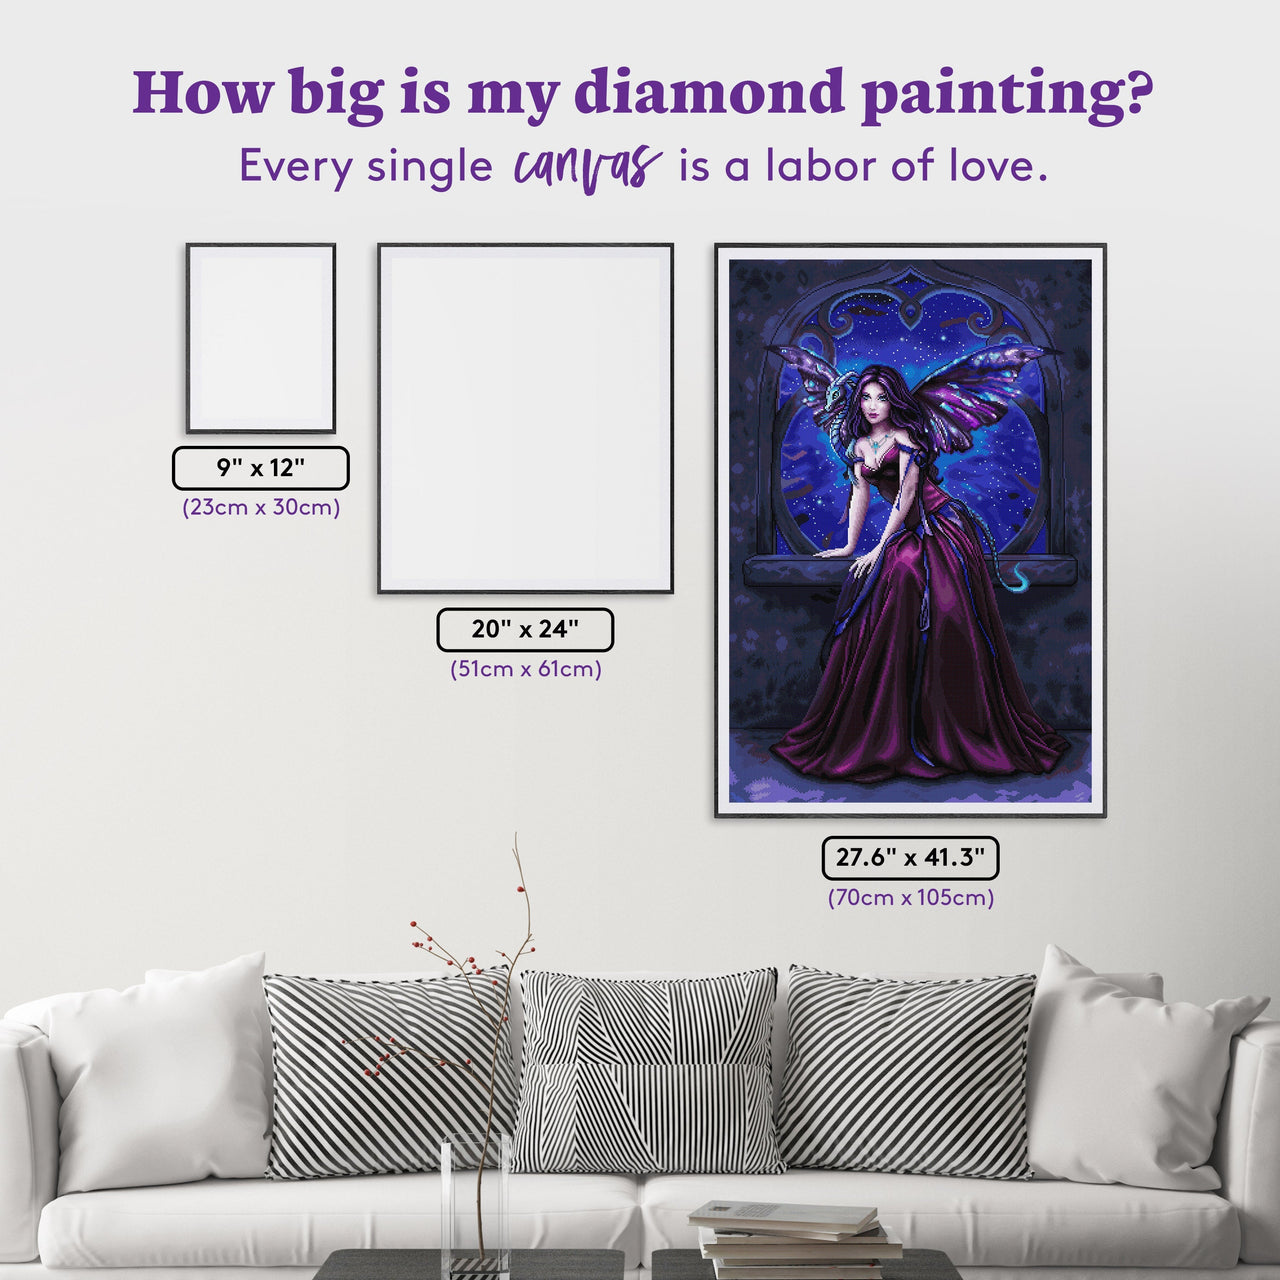 Diamond Painting Andromeda 27.6" x 41.3" (70cm x 105cm) / Square with 50 Colors including 3 ABs and 1 Electro and 1 Fairy Dust Diamonds / 118,301